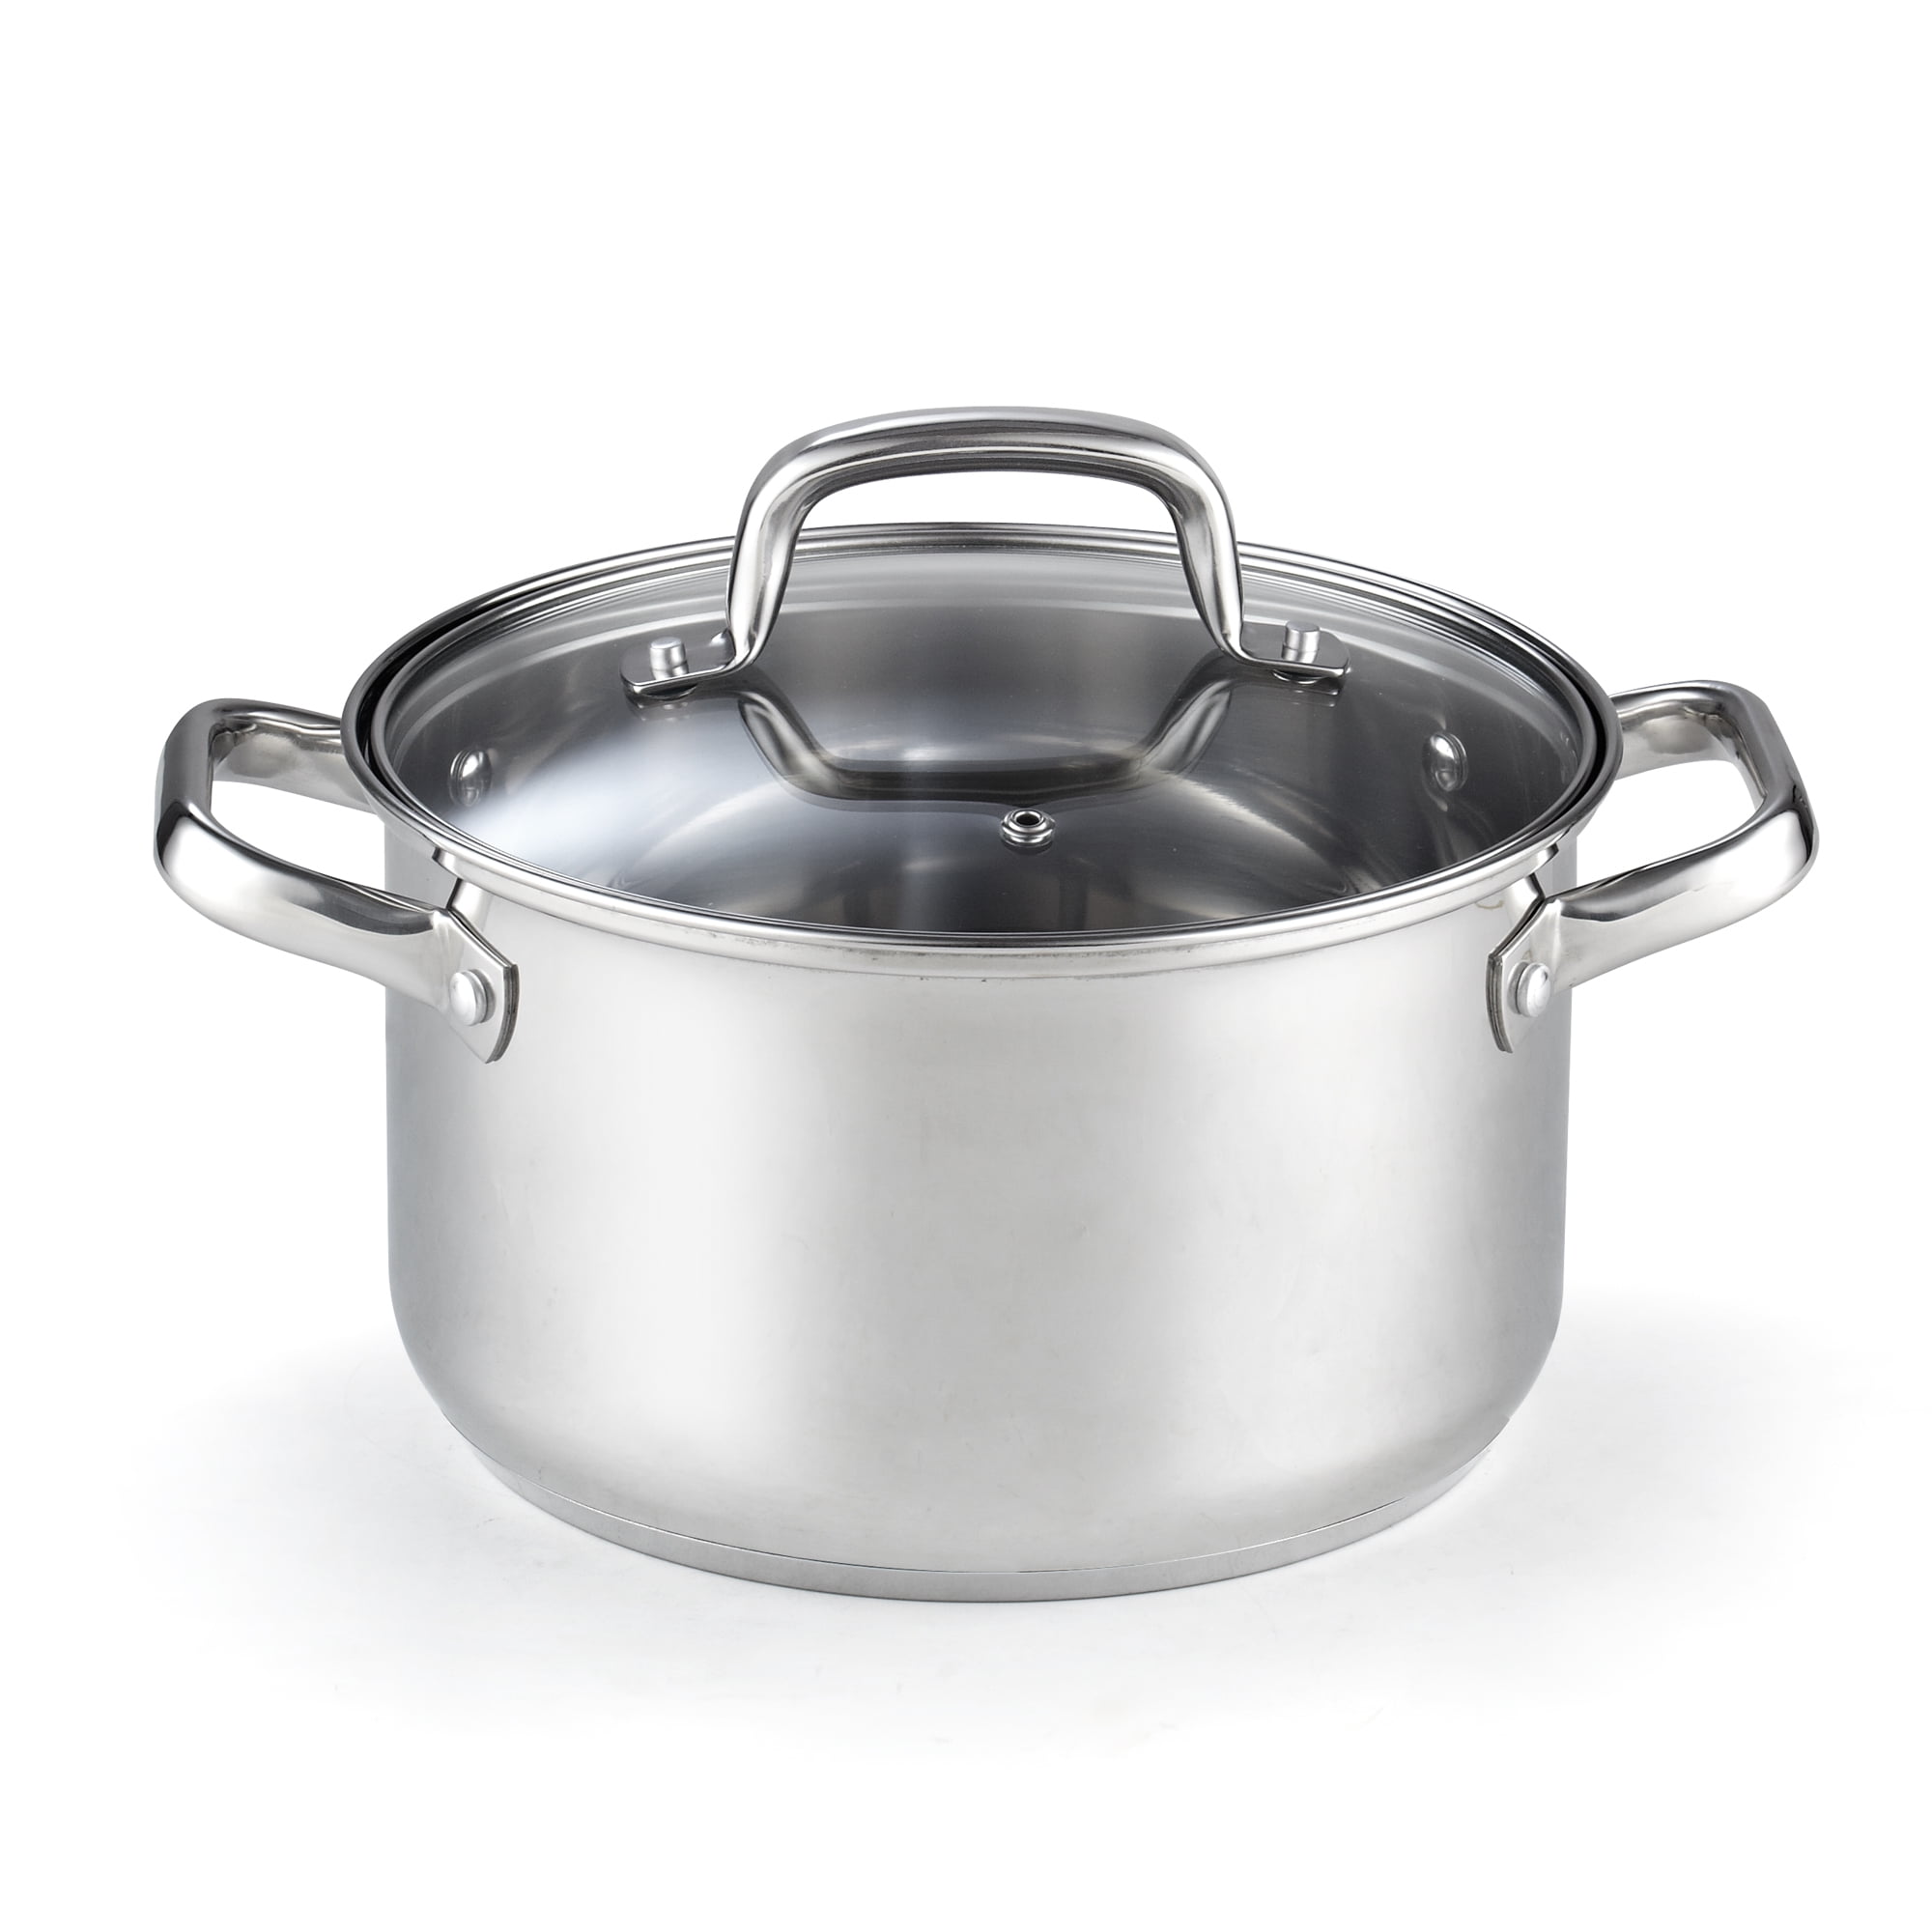 Cook N Home 5-Quart Stainless Steel Casserole Stockpot with Lid Cook N Home Stainless Steel Stockpot